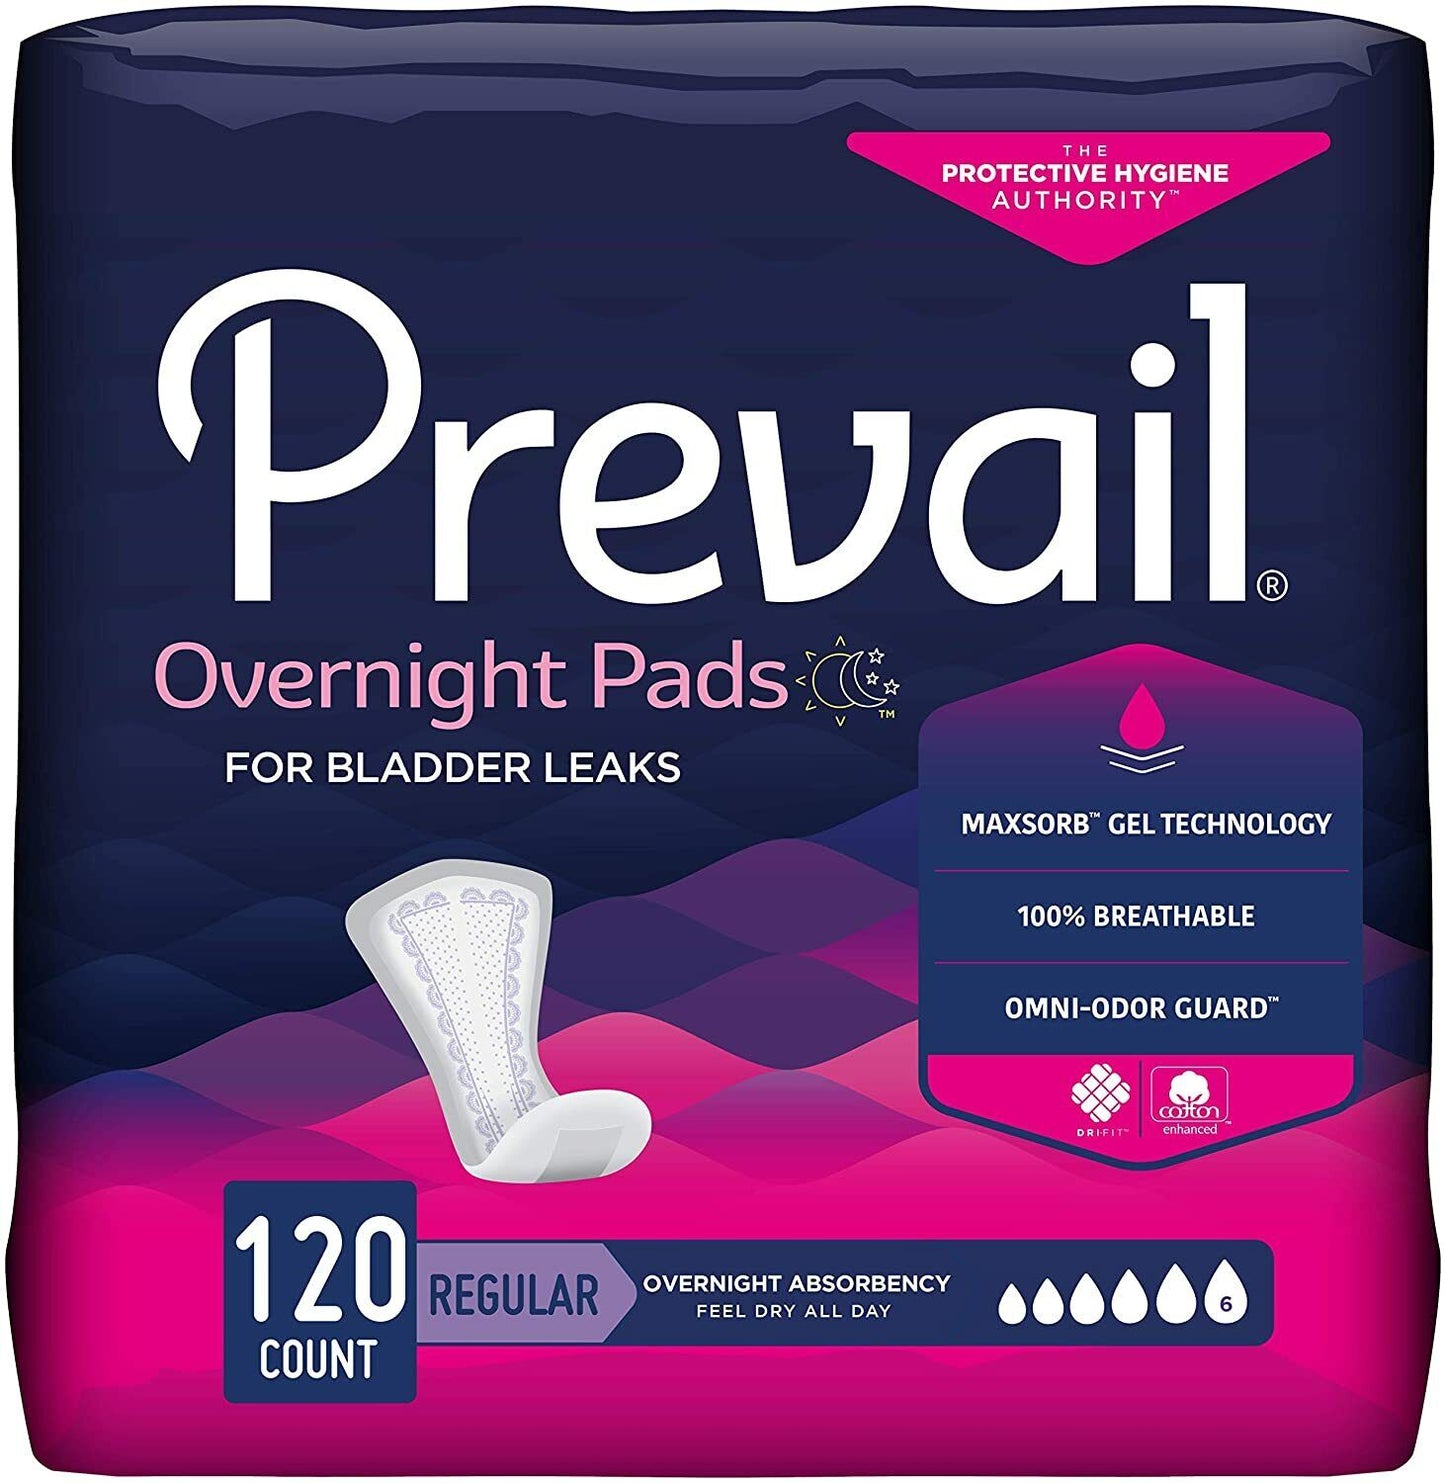 Prevail Daily Women's Incontinence Bladder Control Pads Liners Regular / Long